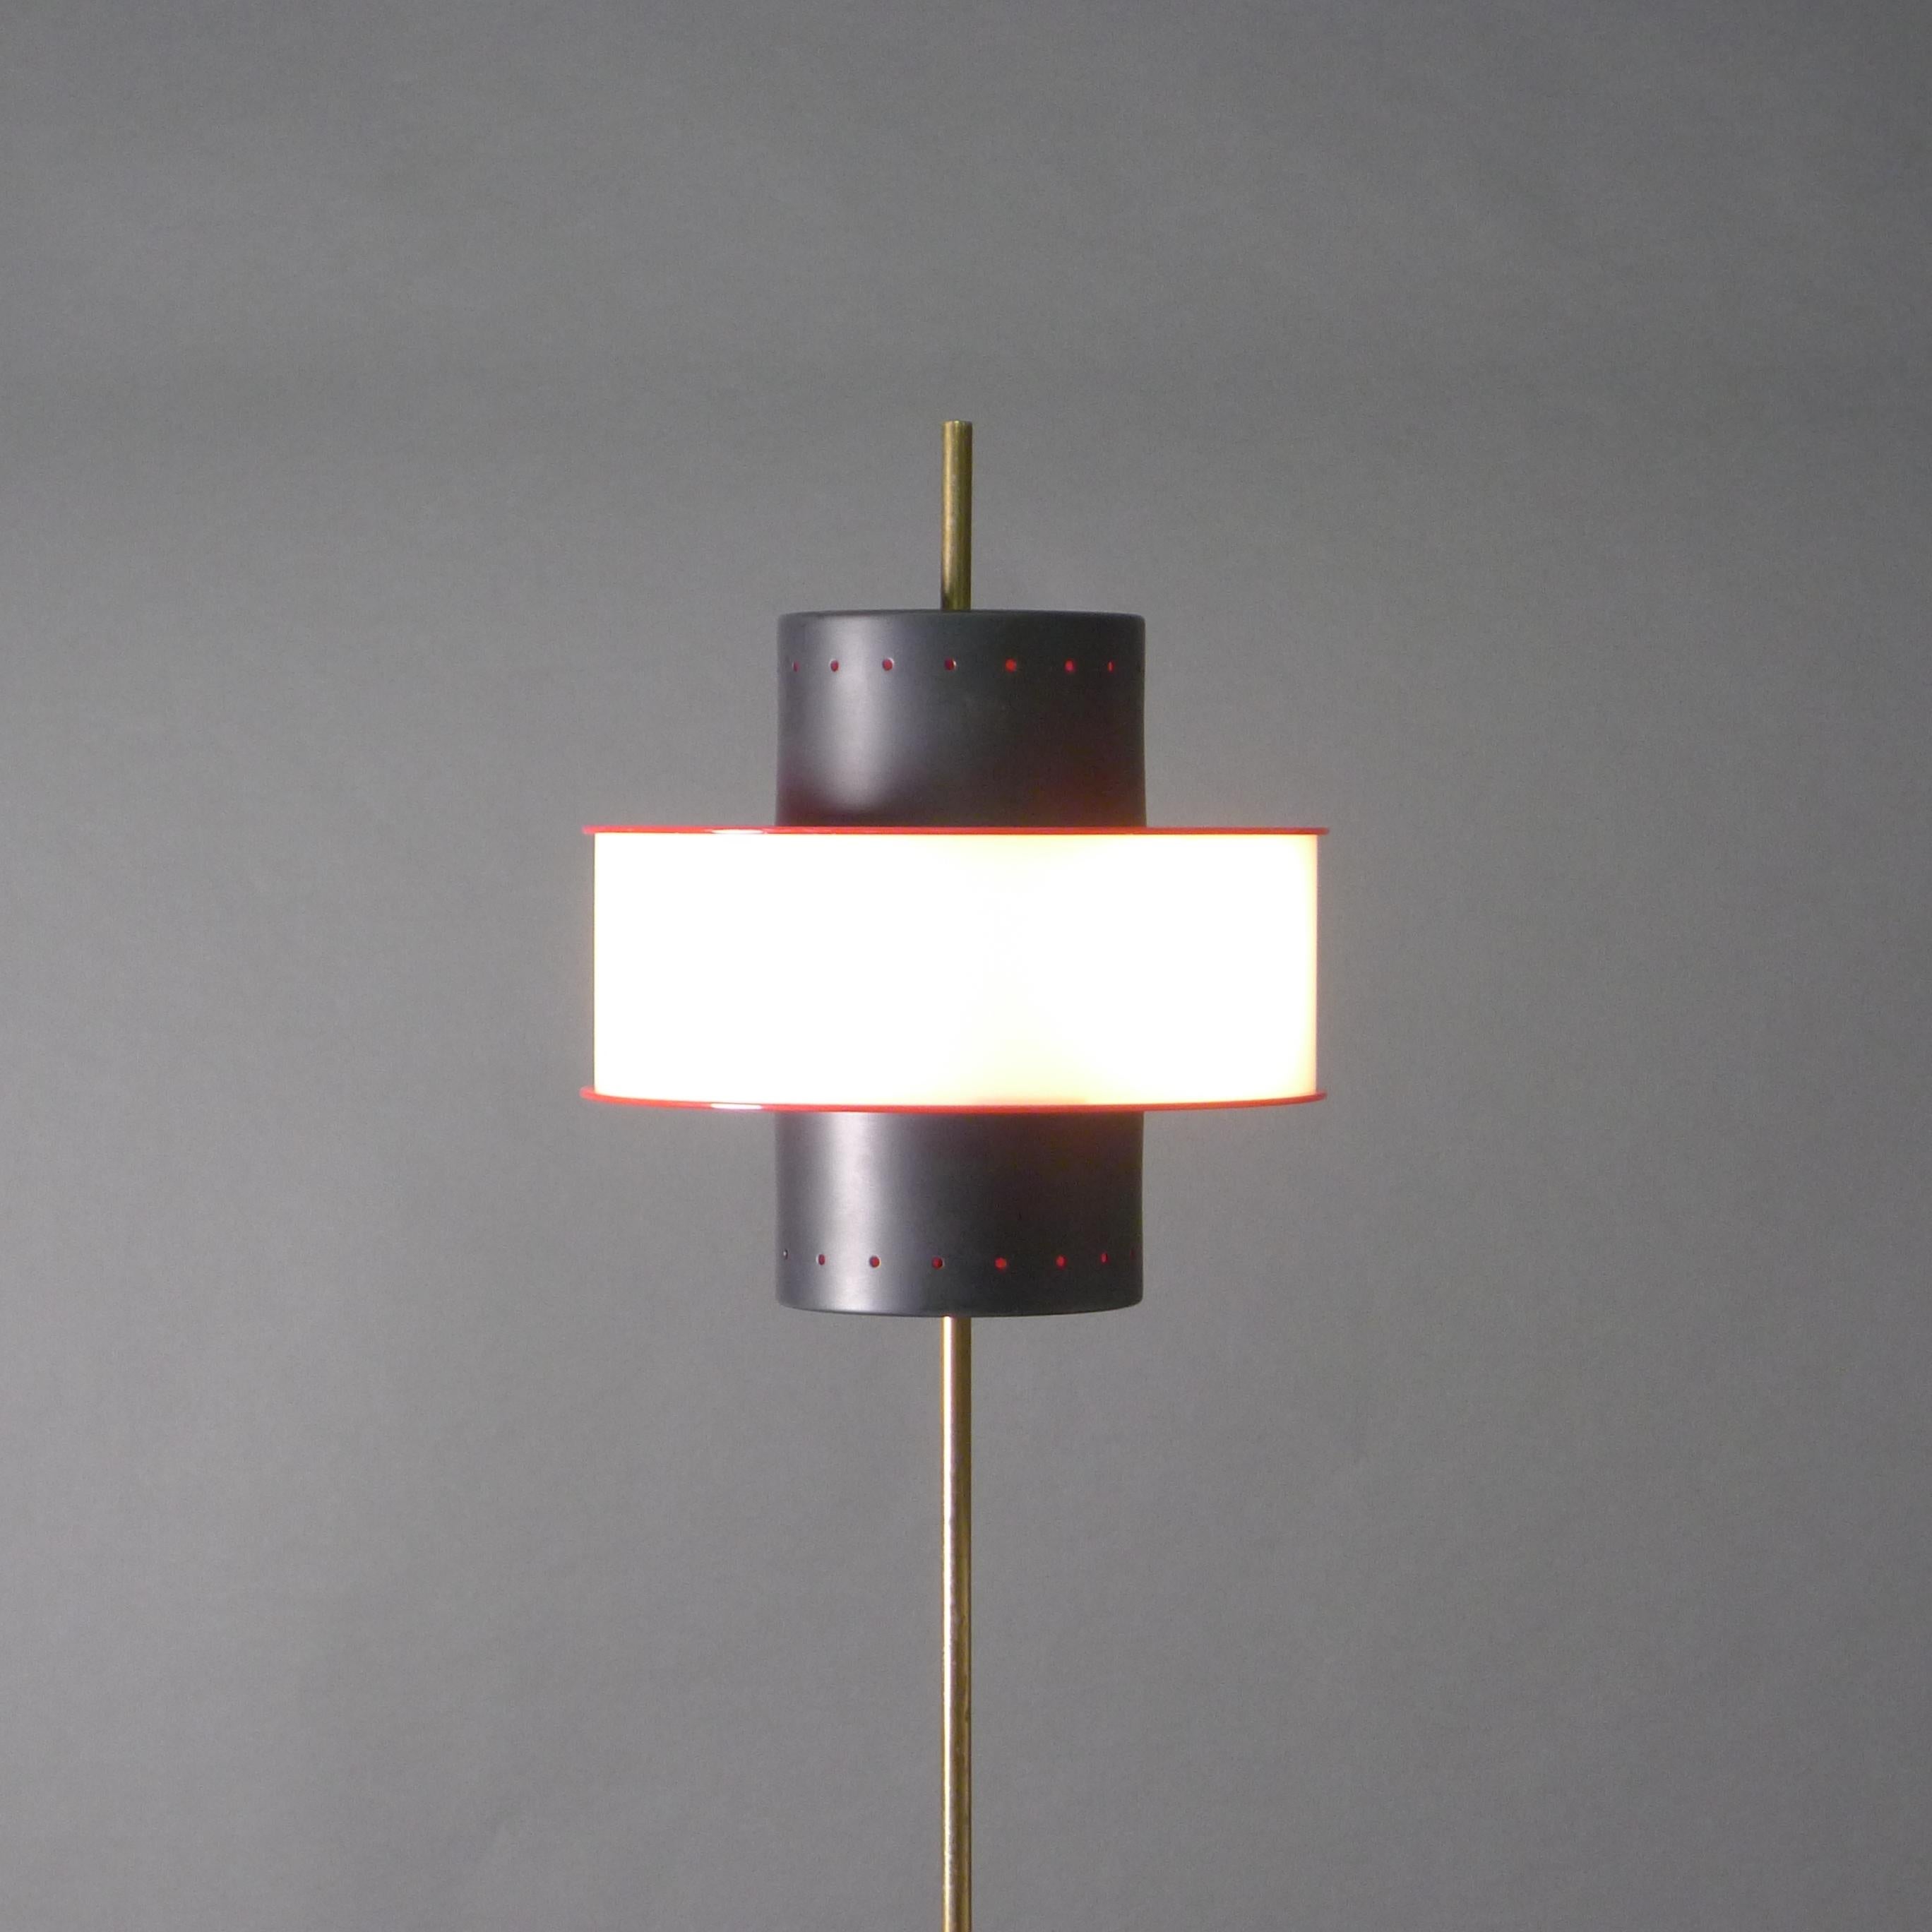 Vintage Stilnovo Floor Lamp, Black, White and Red Perforated Shade, Marble Base For Sale 5